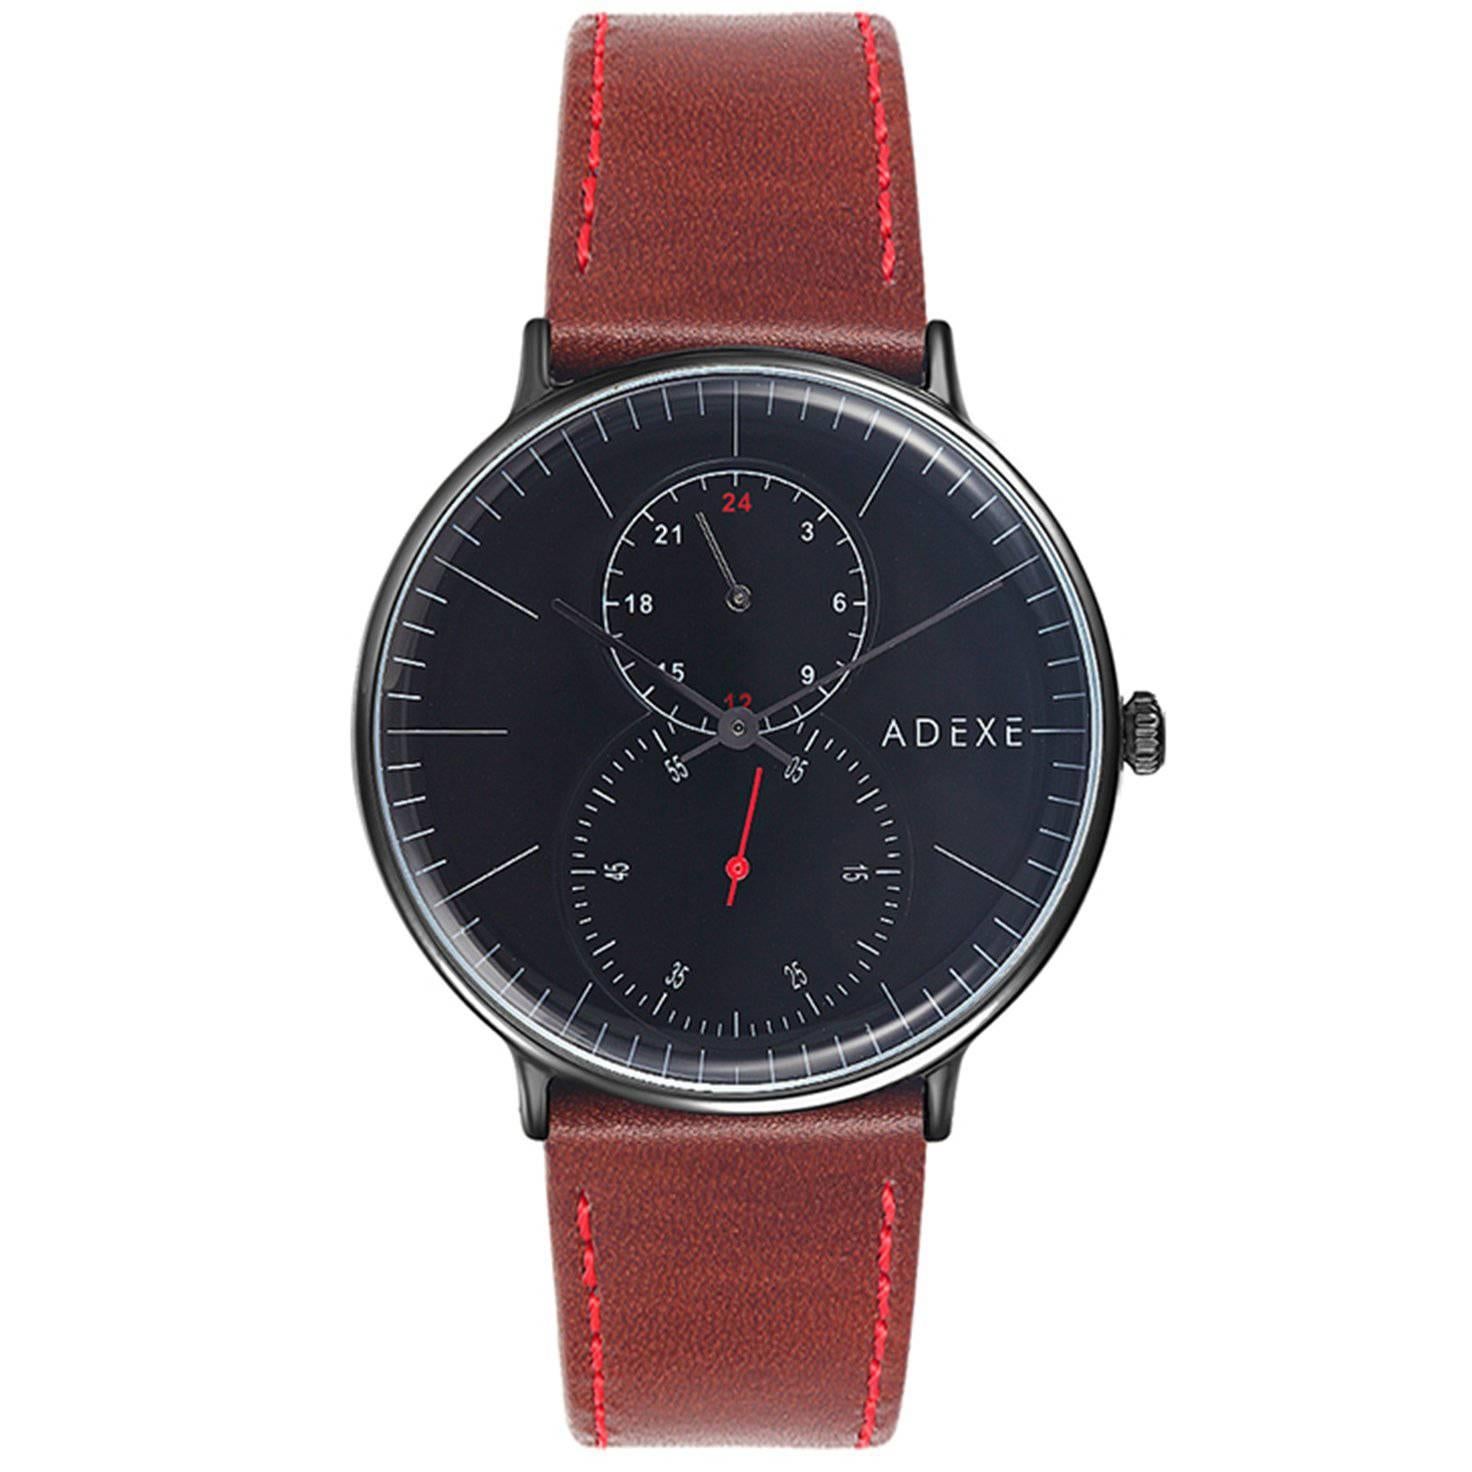 Foreseer Black and Brown Genuine Italian Leather Lifestyle Watch